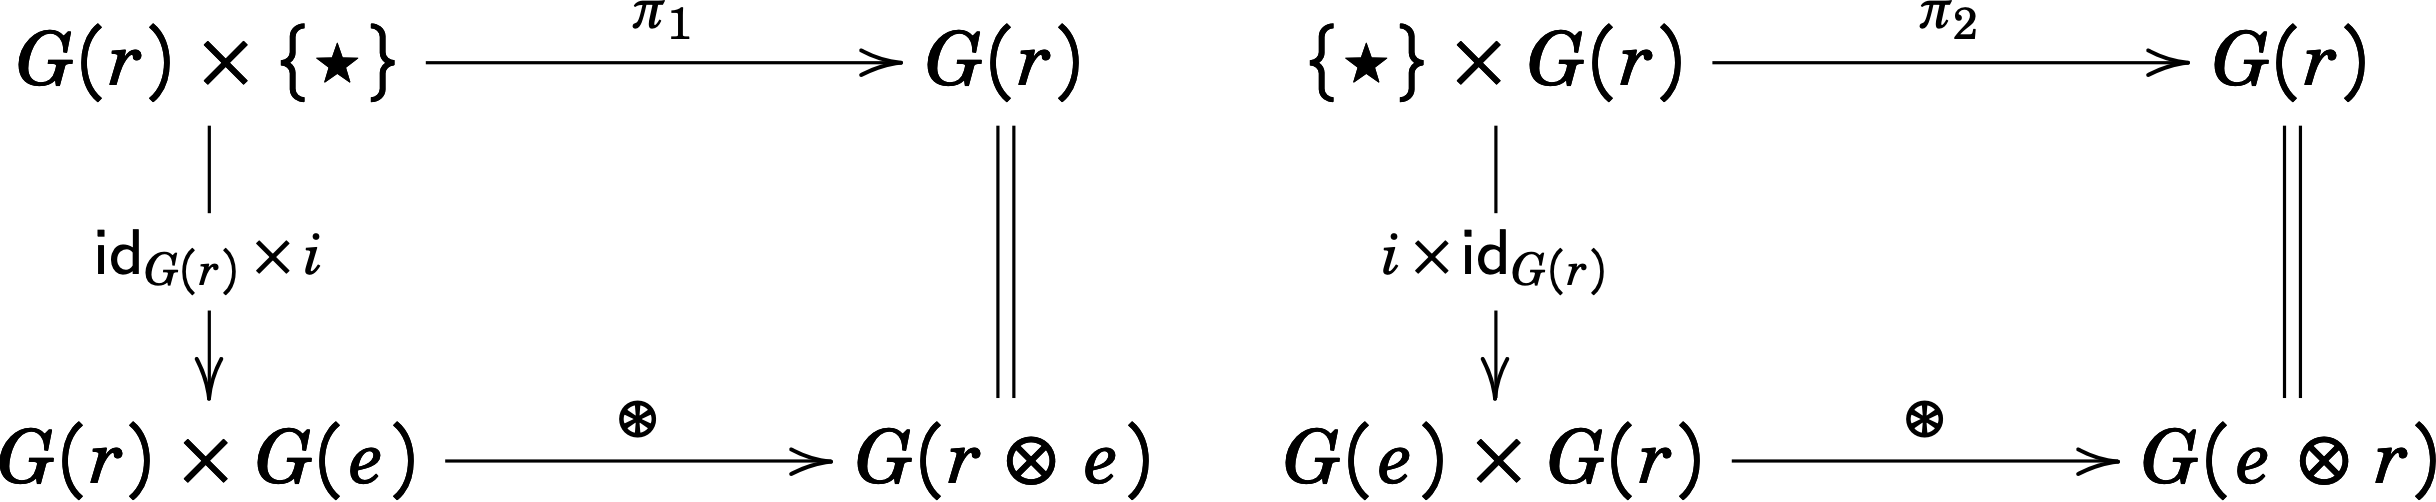 Commutative diagram for the left-identity axiom for a graded monoid.